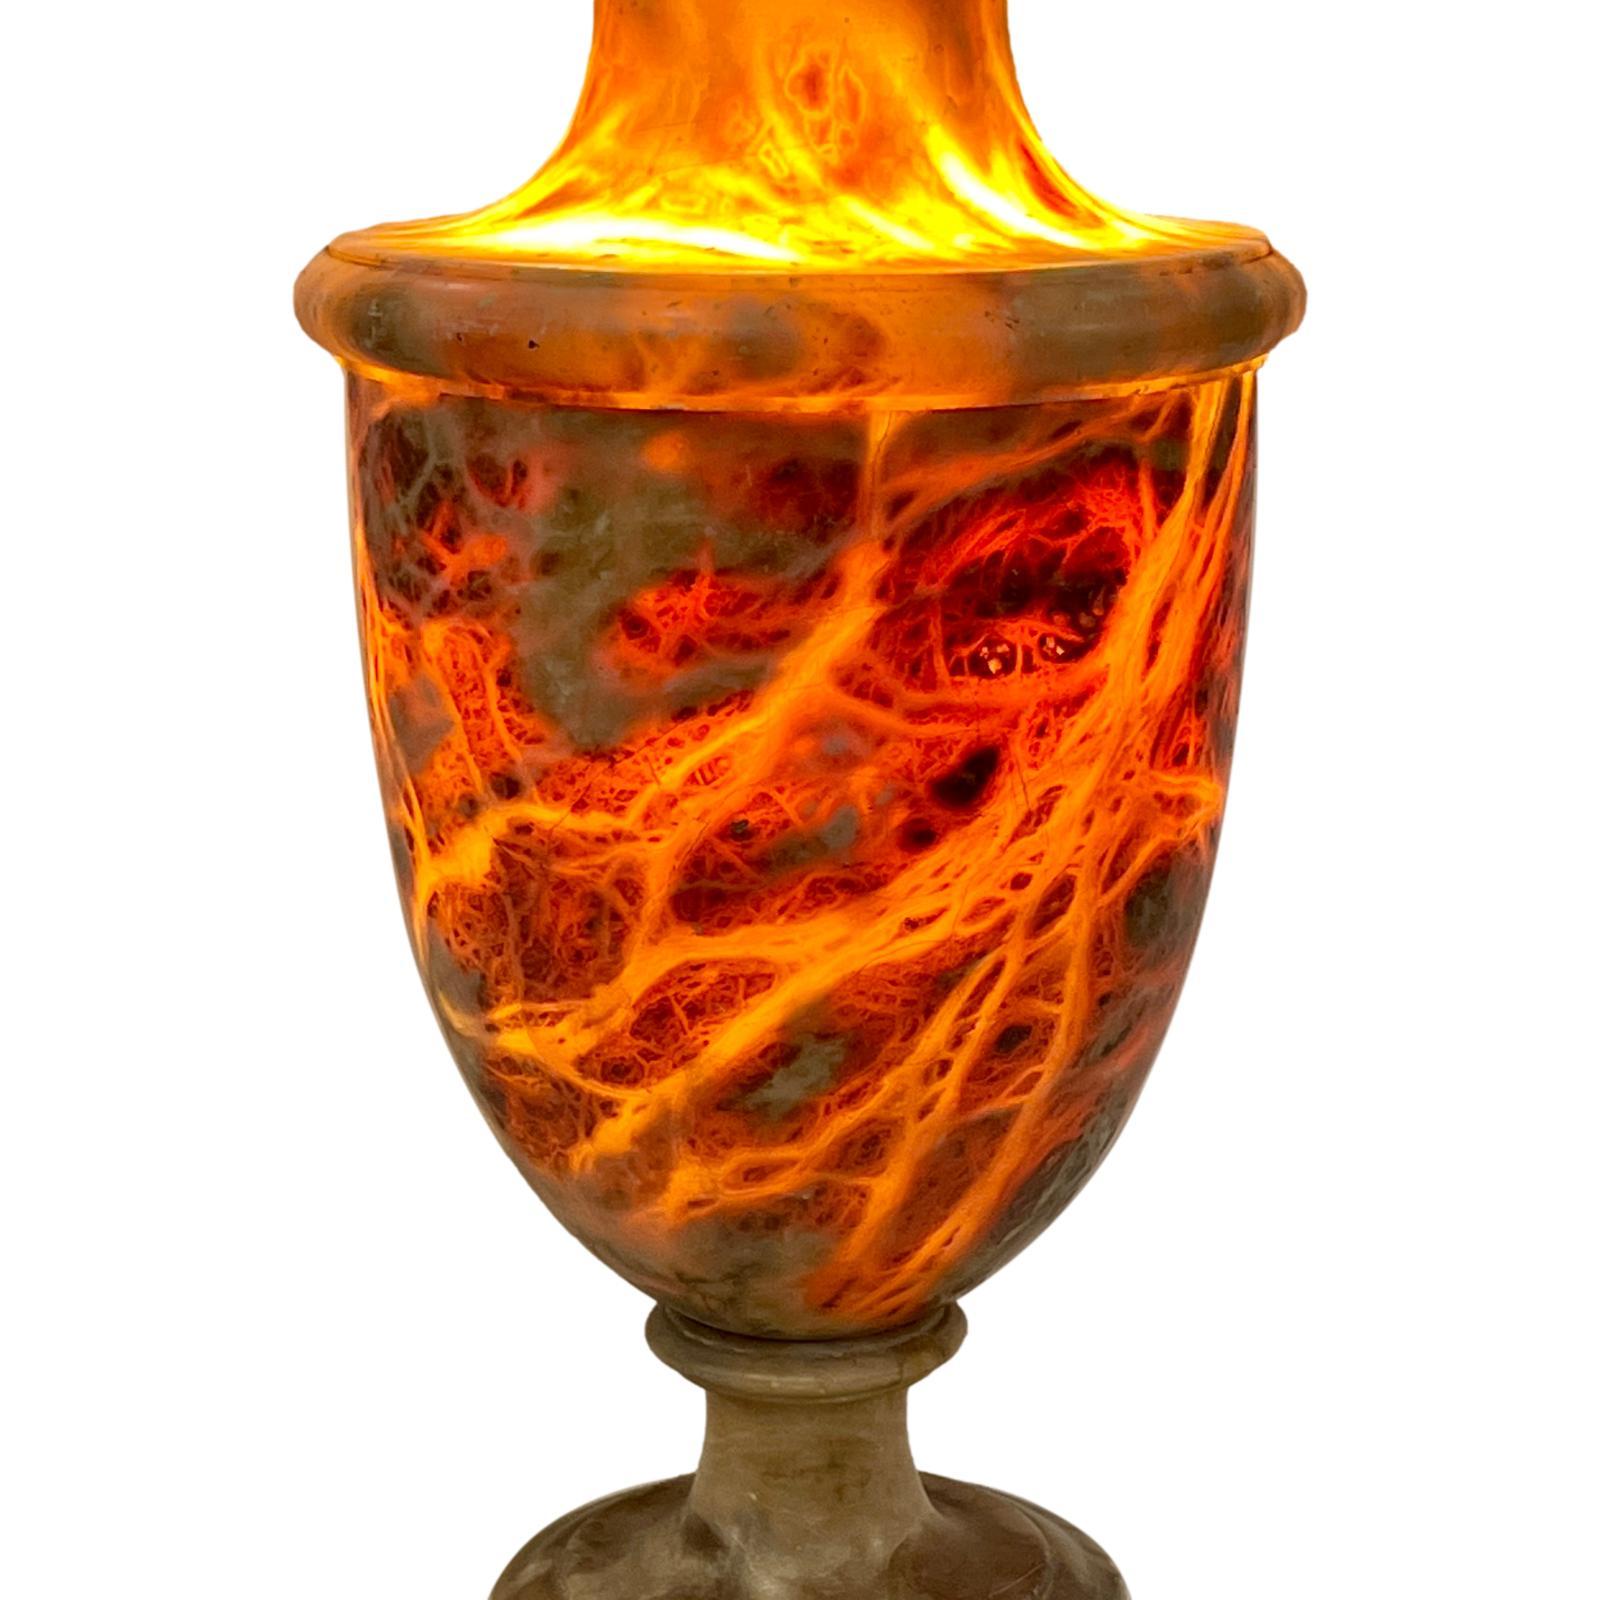 A circa 1920's Italian alabaster urn lamp mounted on a lucite base.

Measurements:
height: 13.5